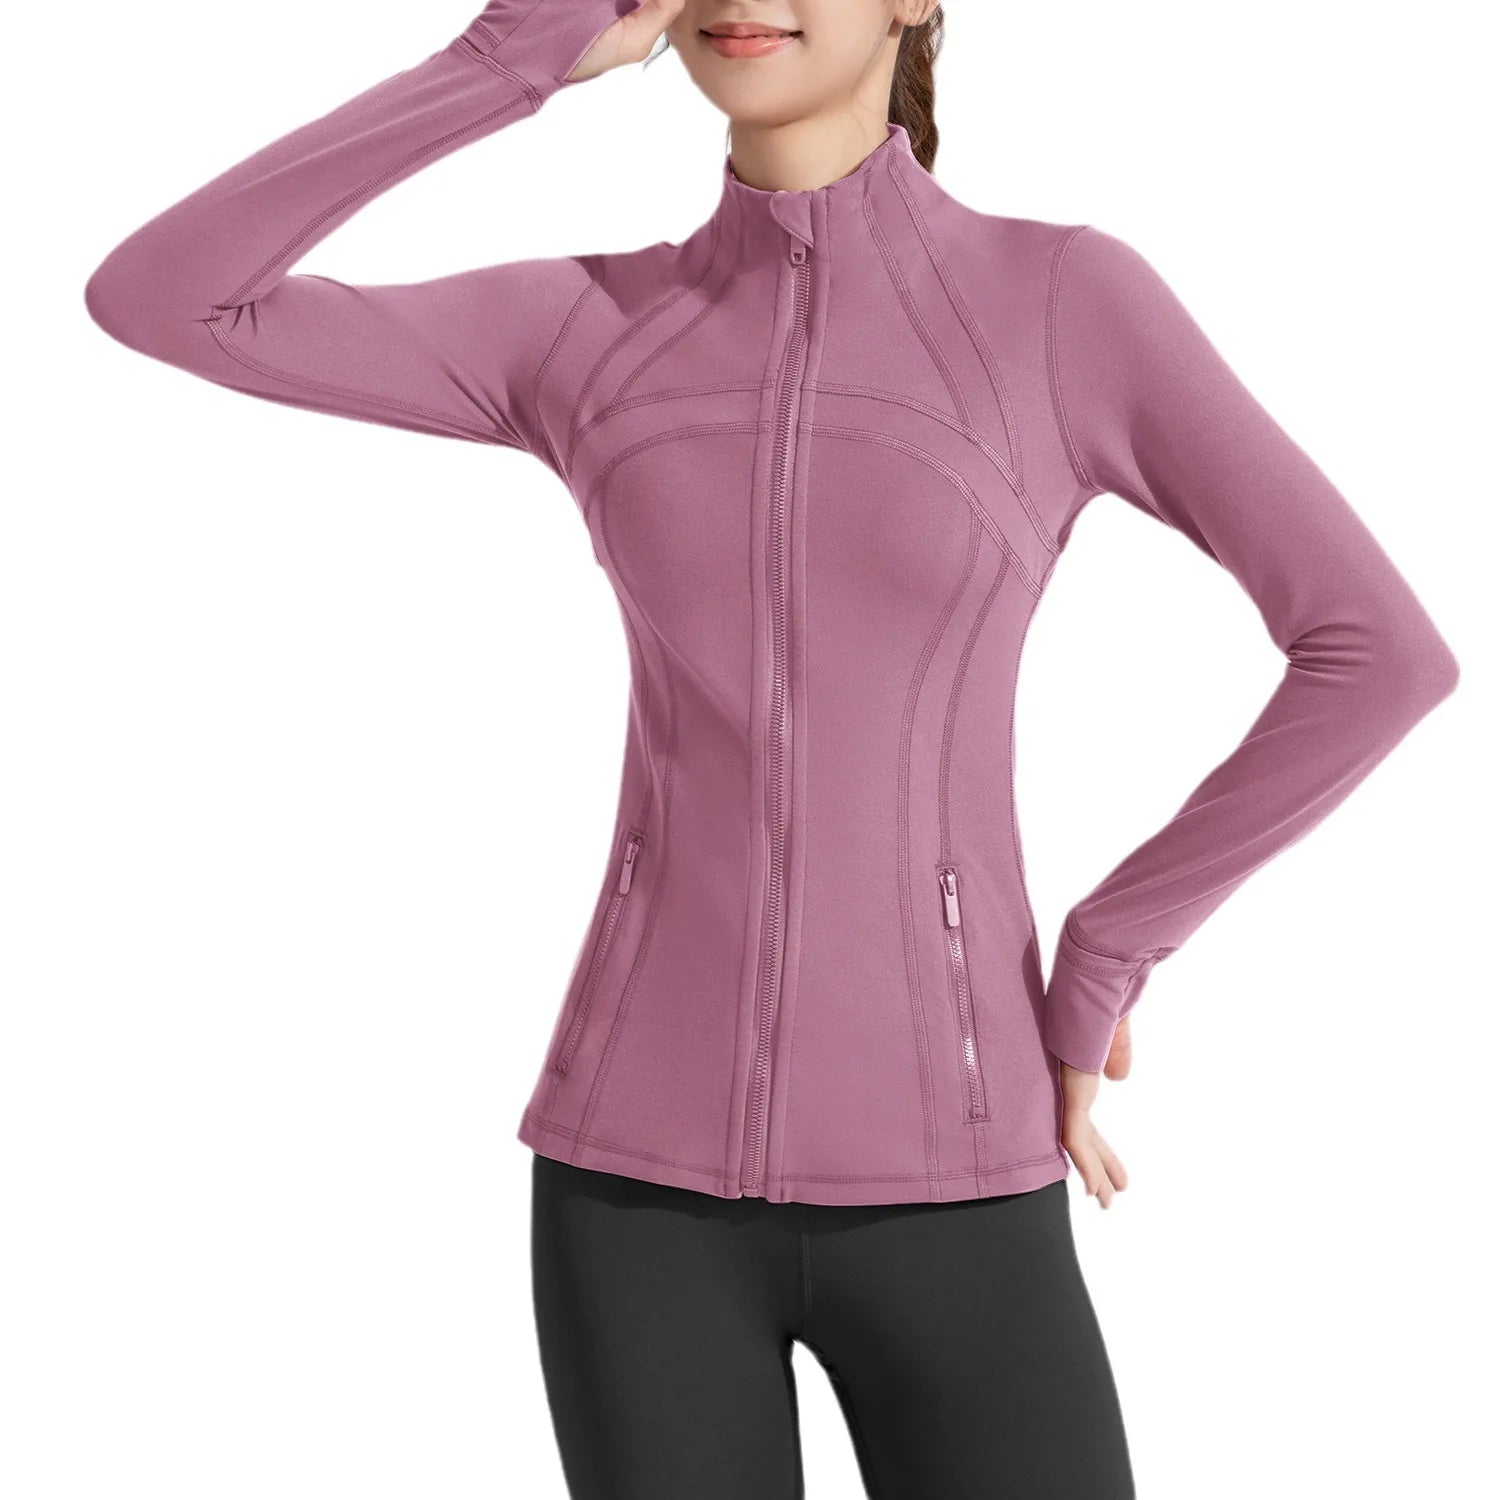 Stand-Up Collar Yoga Clothing Jacket With Pocket Woman Long-Sleeved Top Zipper Outdoor Fitness Running Sports Coat Women Tops - Women Casual - Women Prom